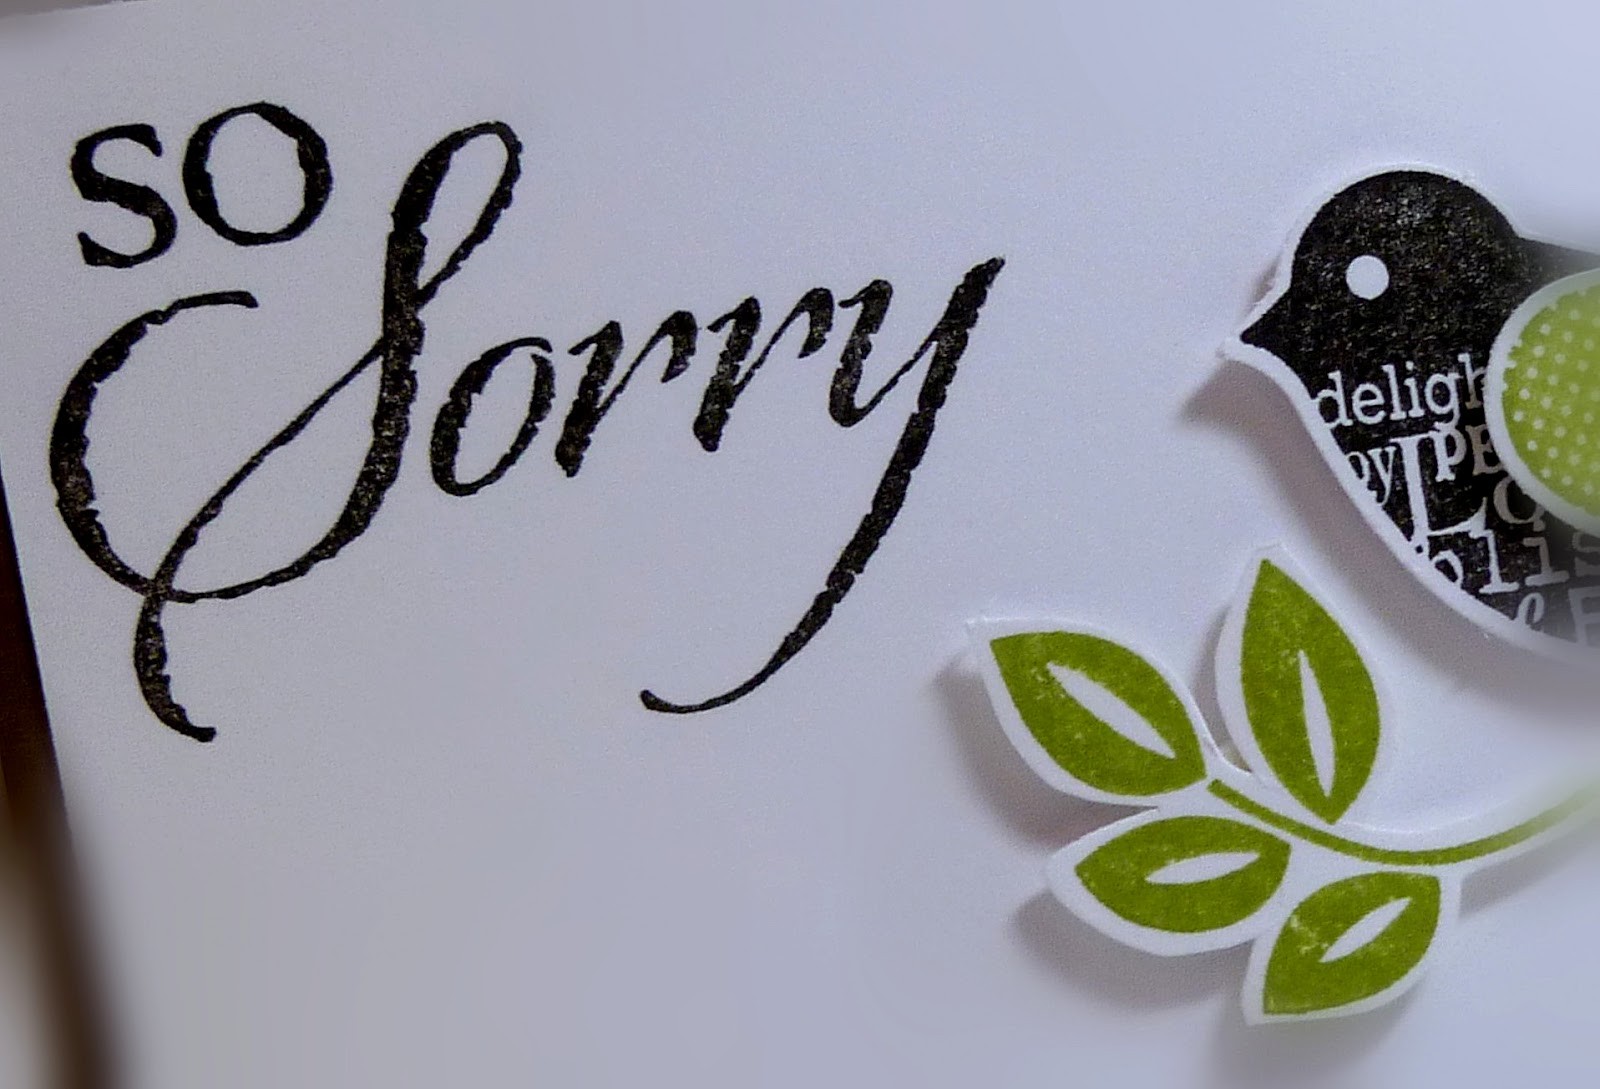 So Sorry HD Wallpaper Daily Pics Update